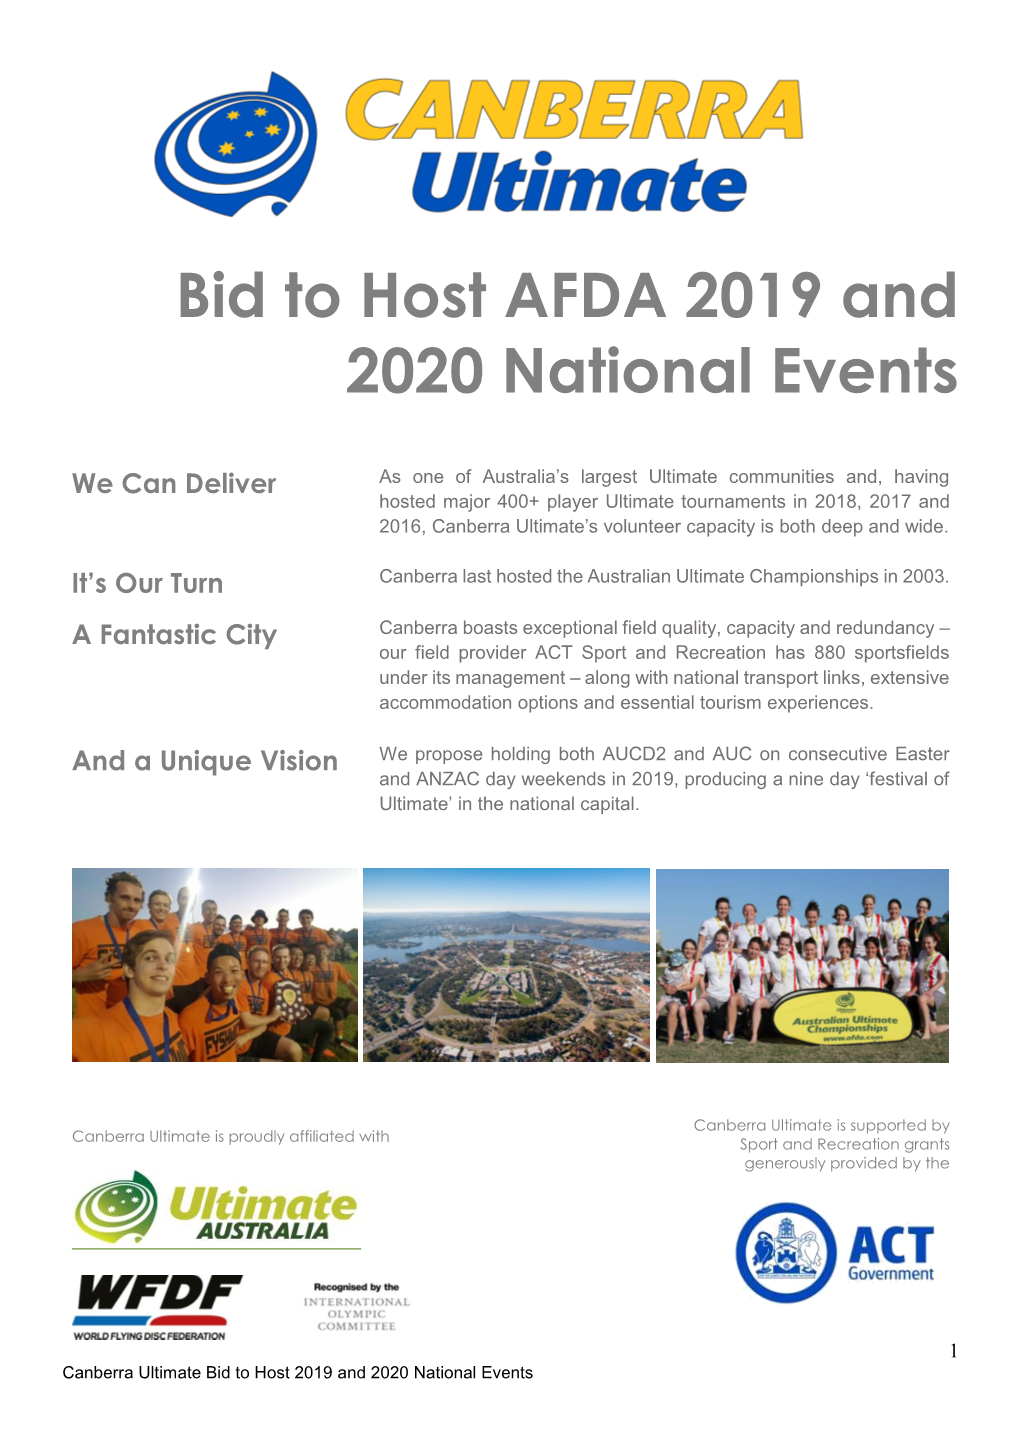 Bid to Host AFDA 2019 and 2020 National Events